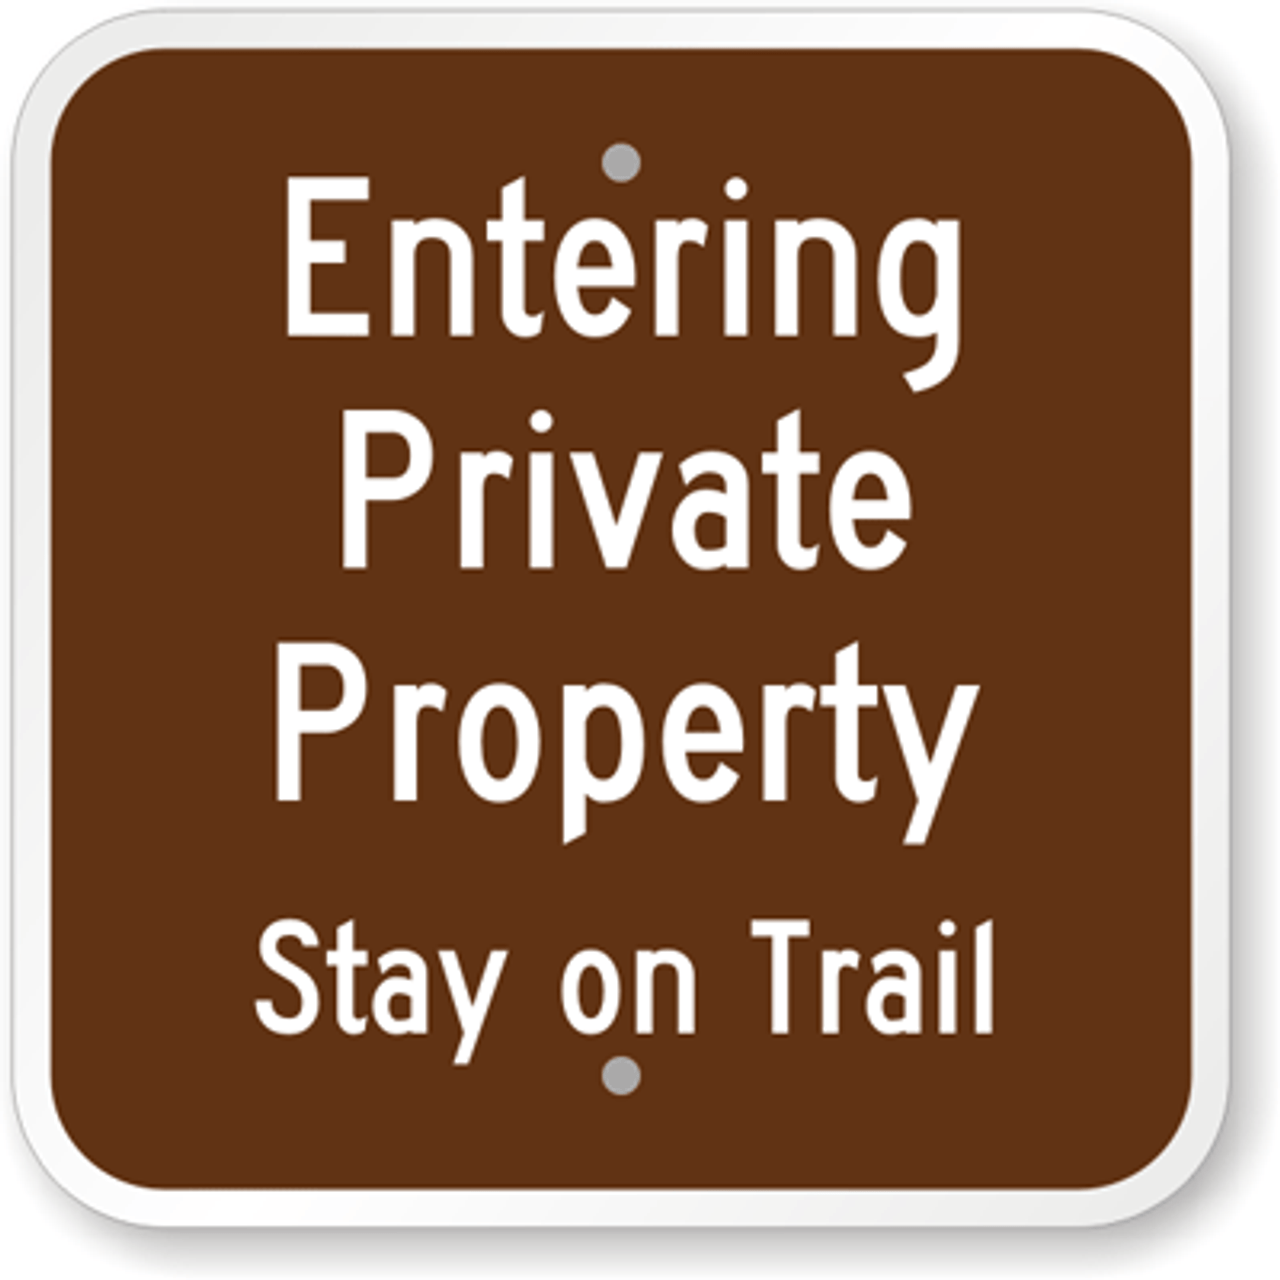 Entering Private Property Signs by Dornbos Sign & Safety Inc.